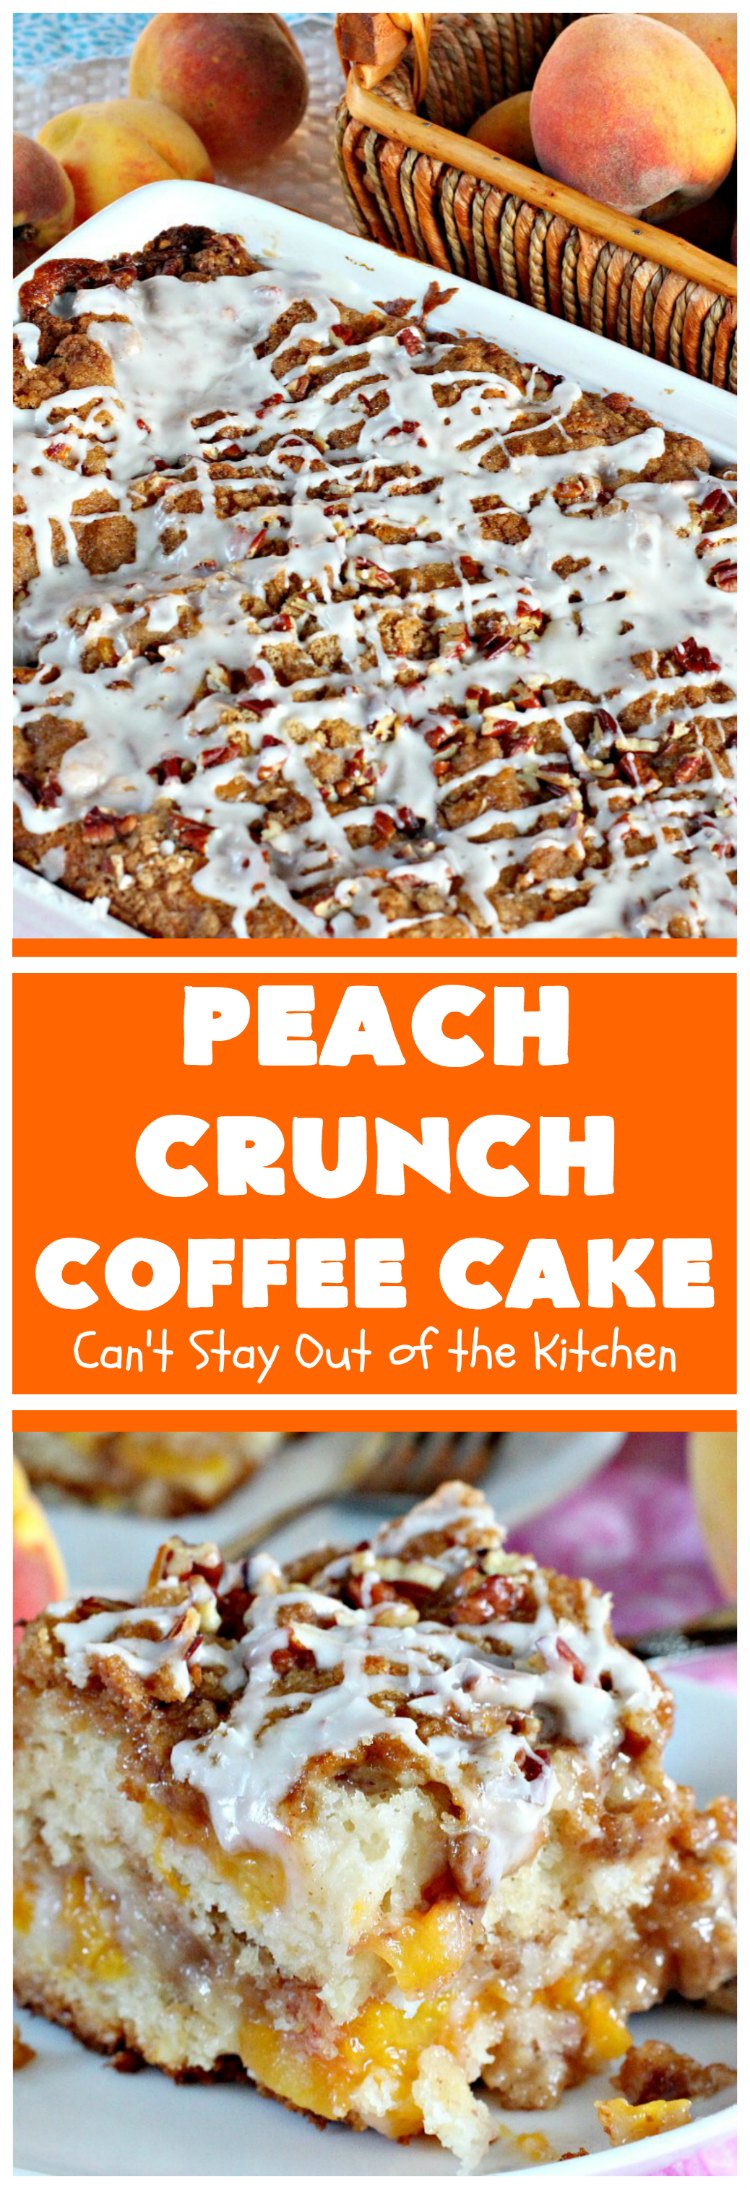 Peach Crunch Coffee Cake | Can't Stay Out of the Kitchen